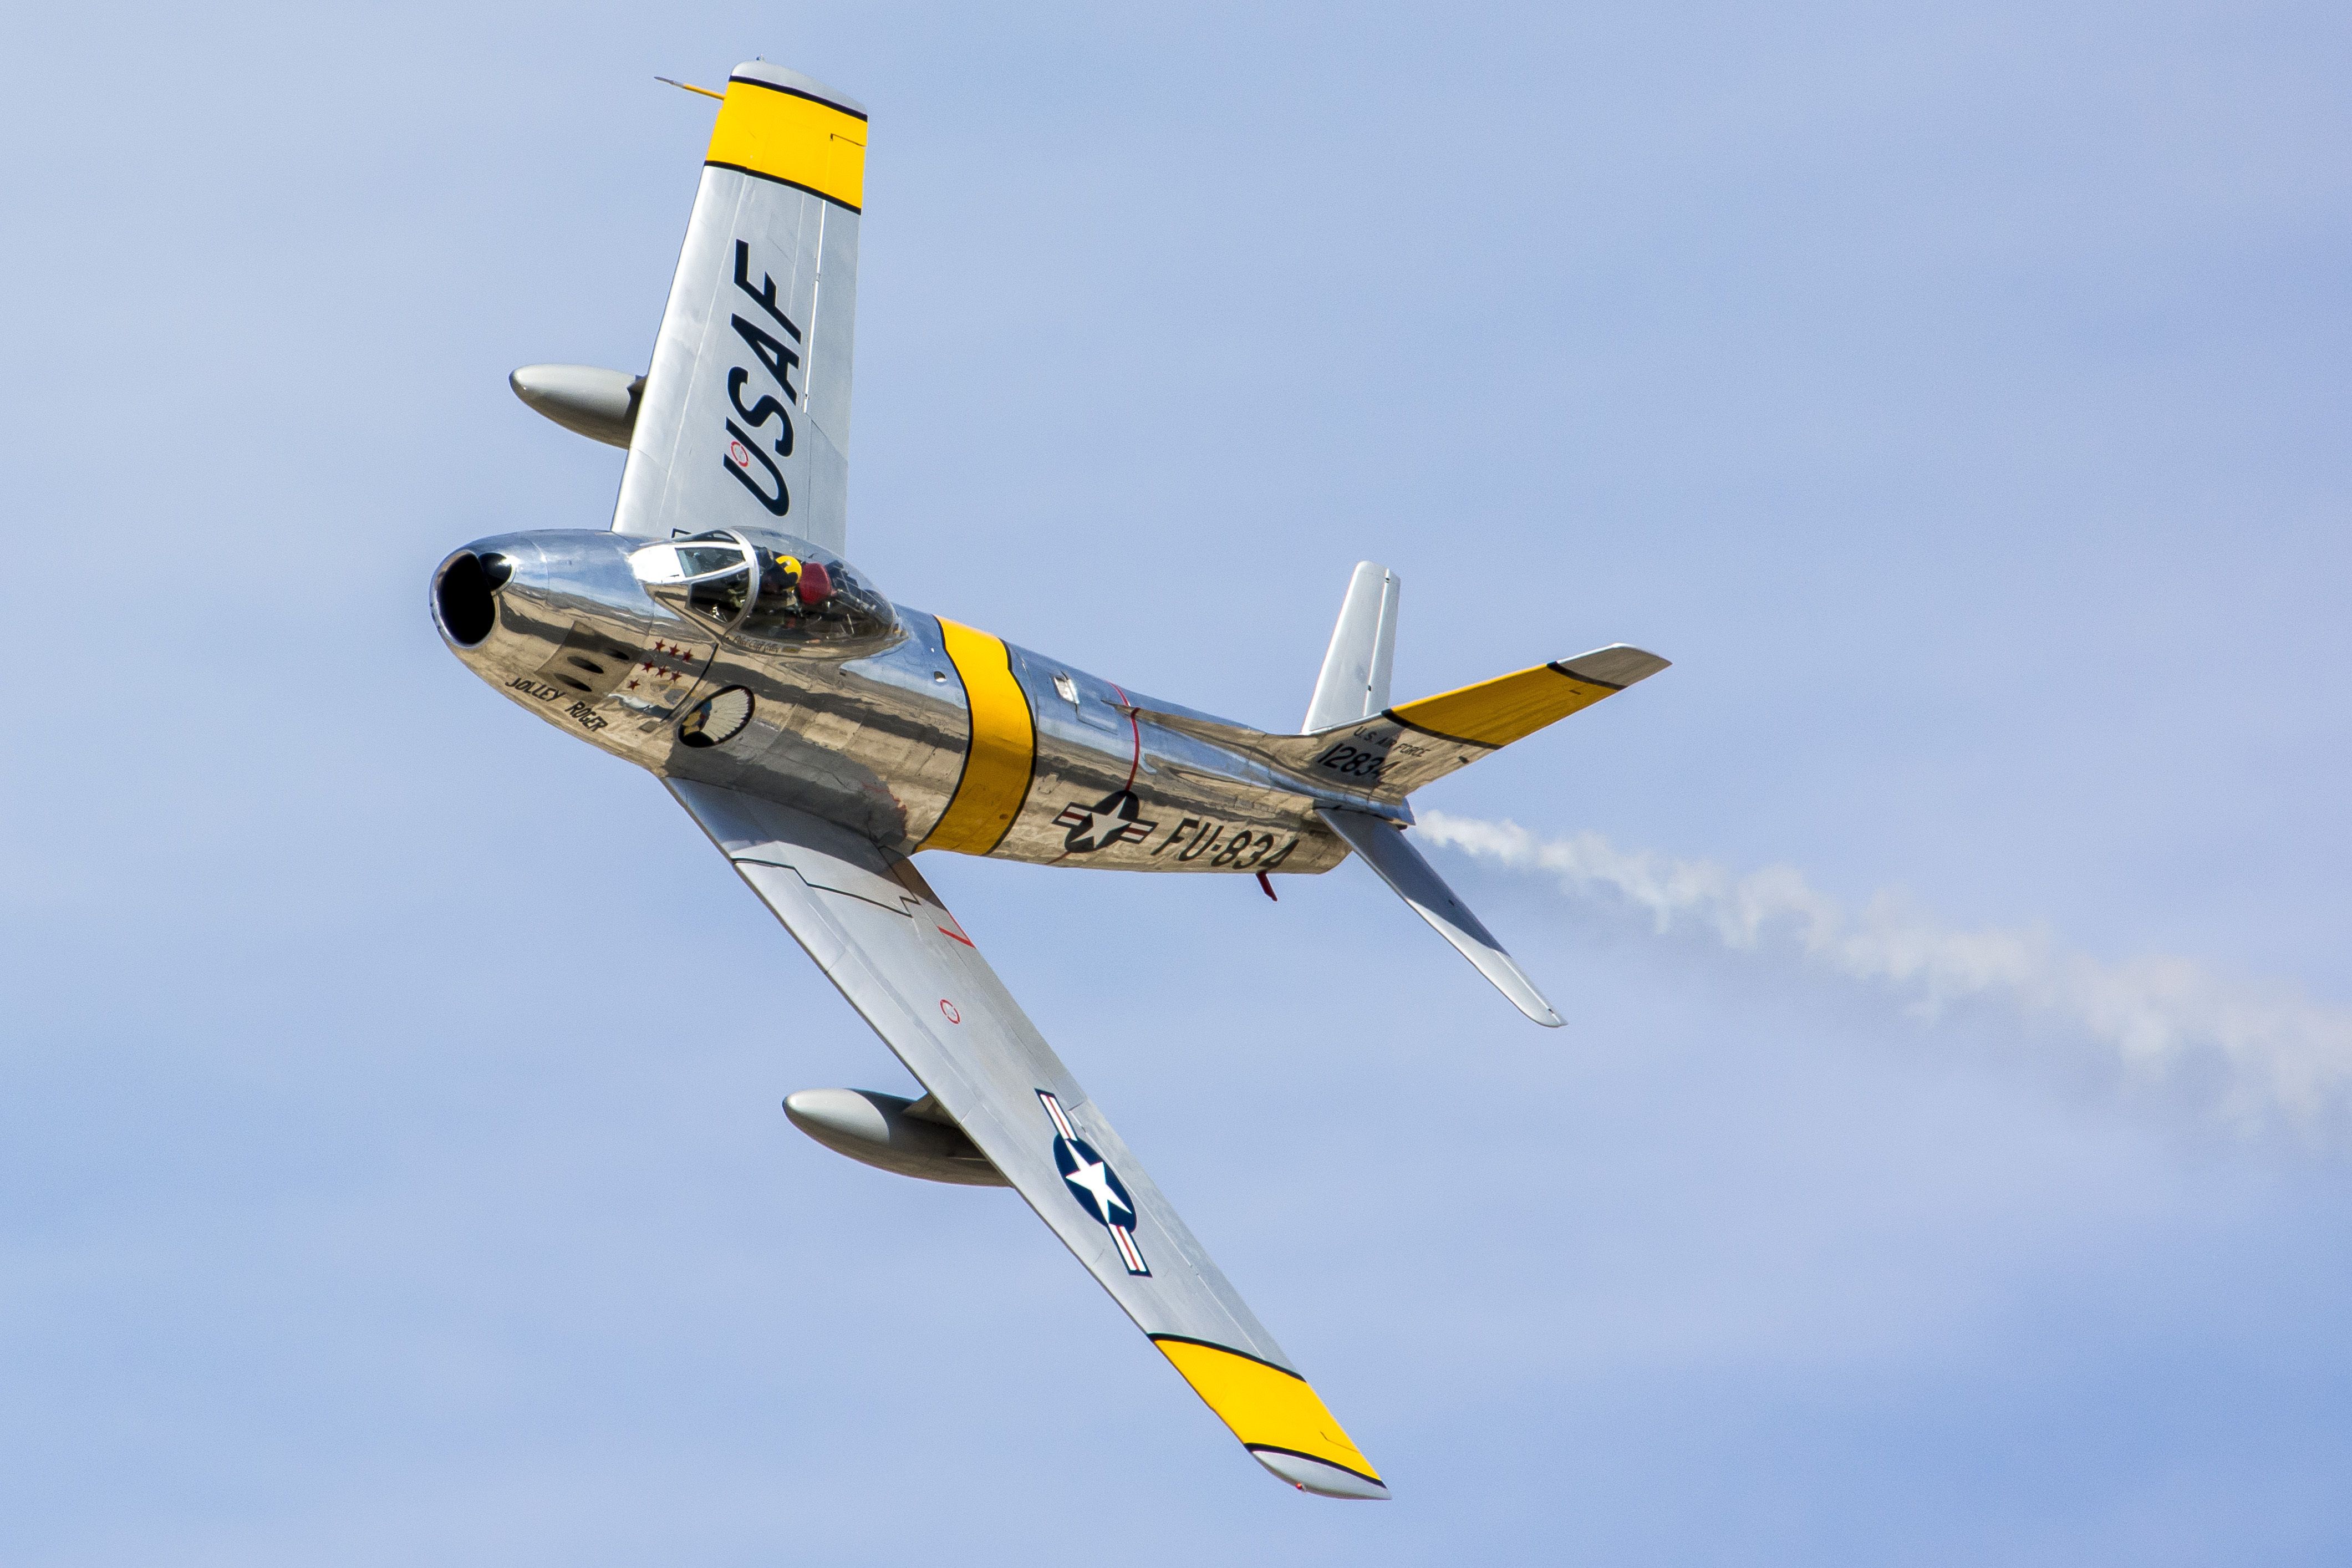 An F-86 flying in the sky.